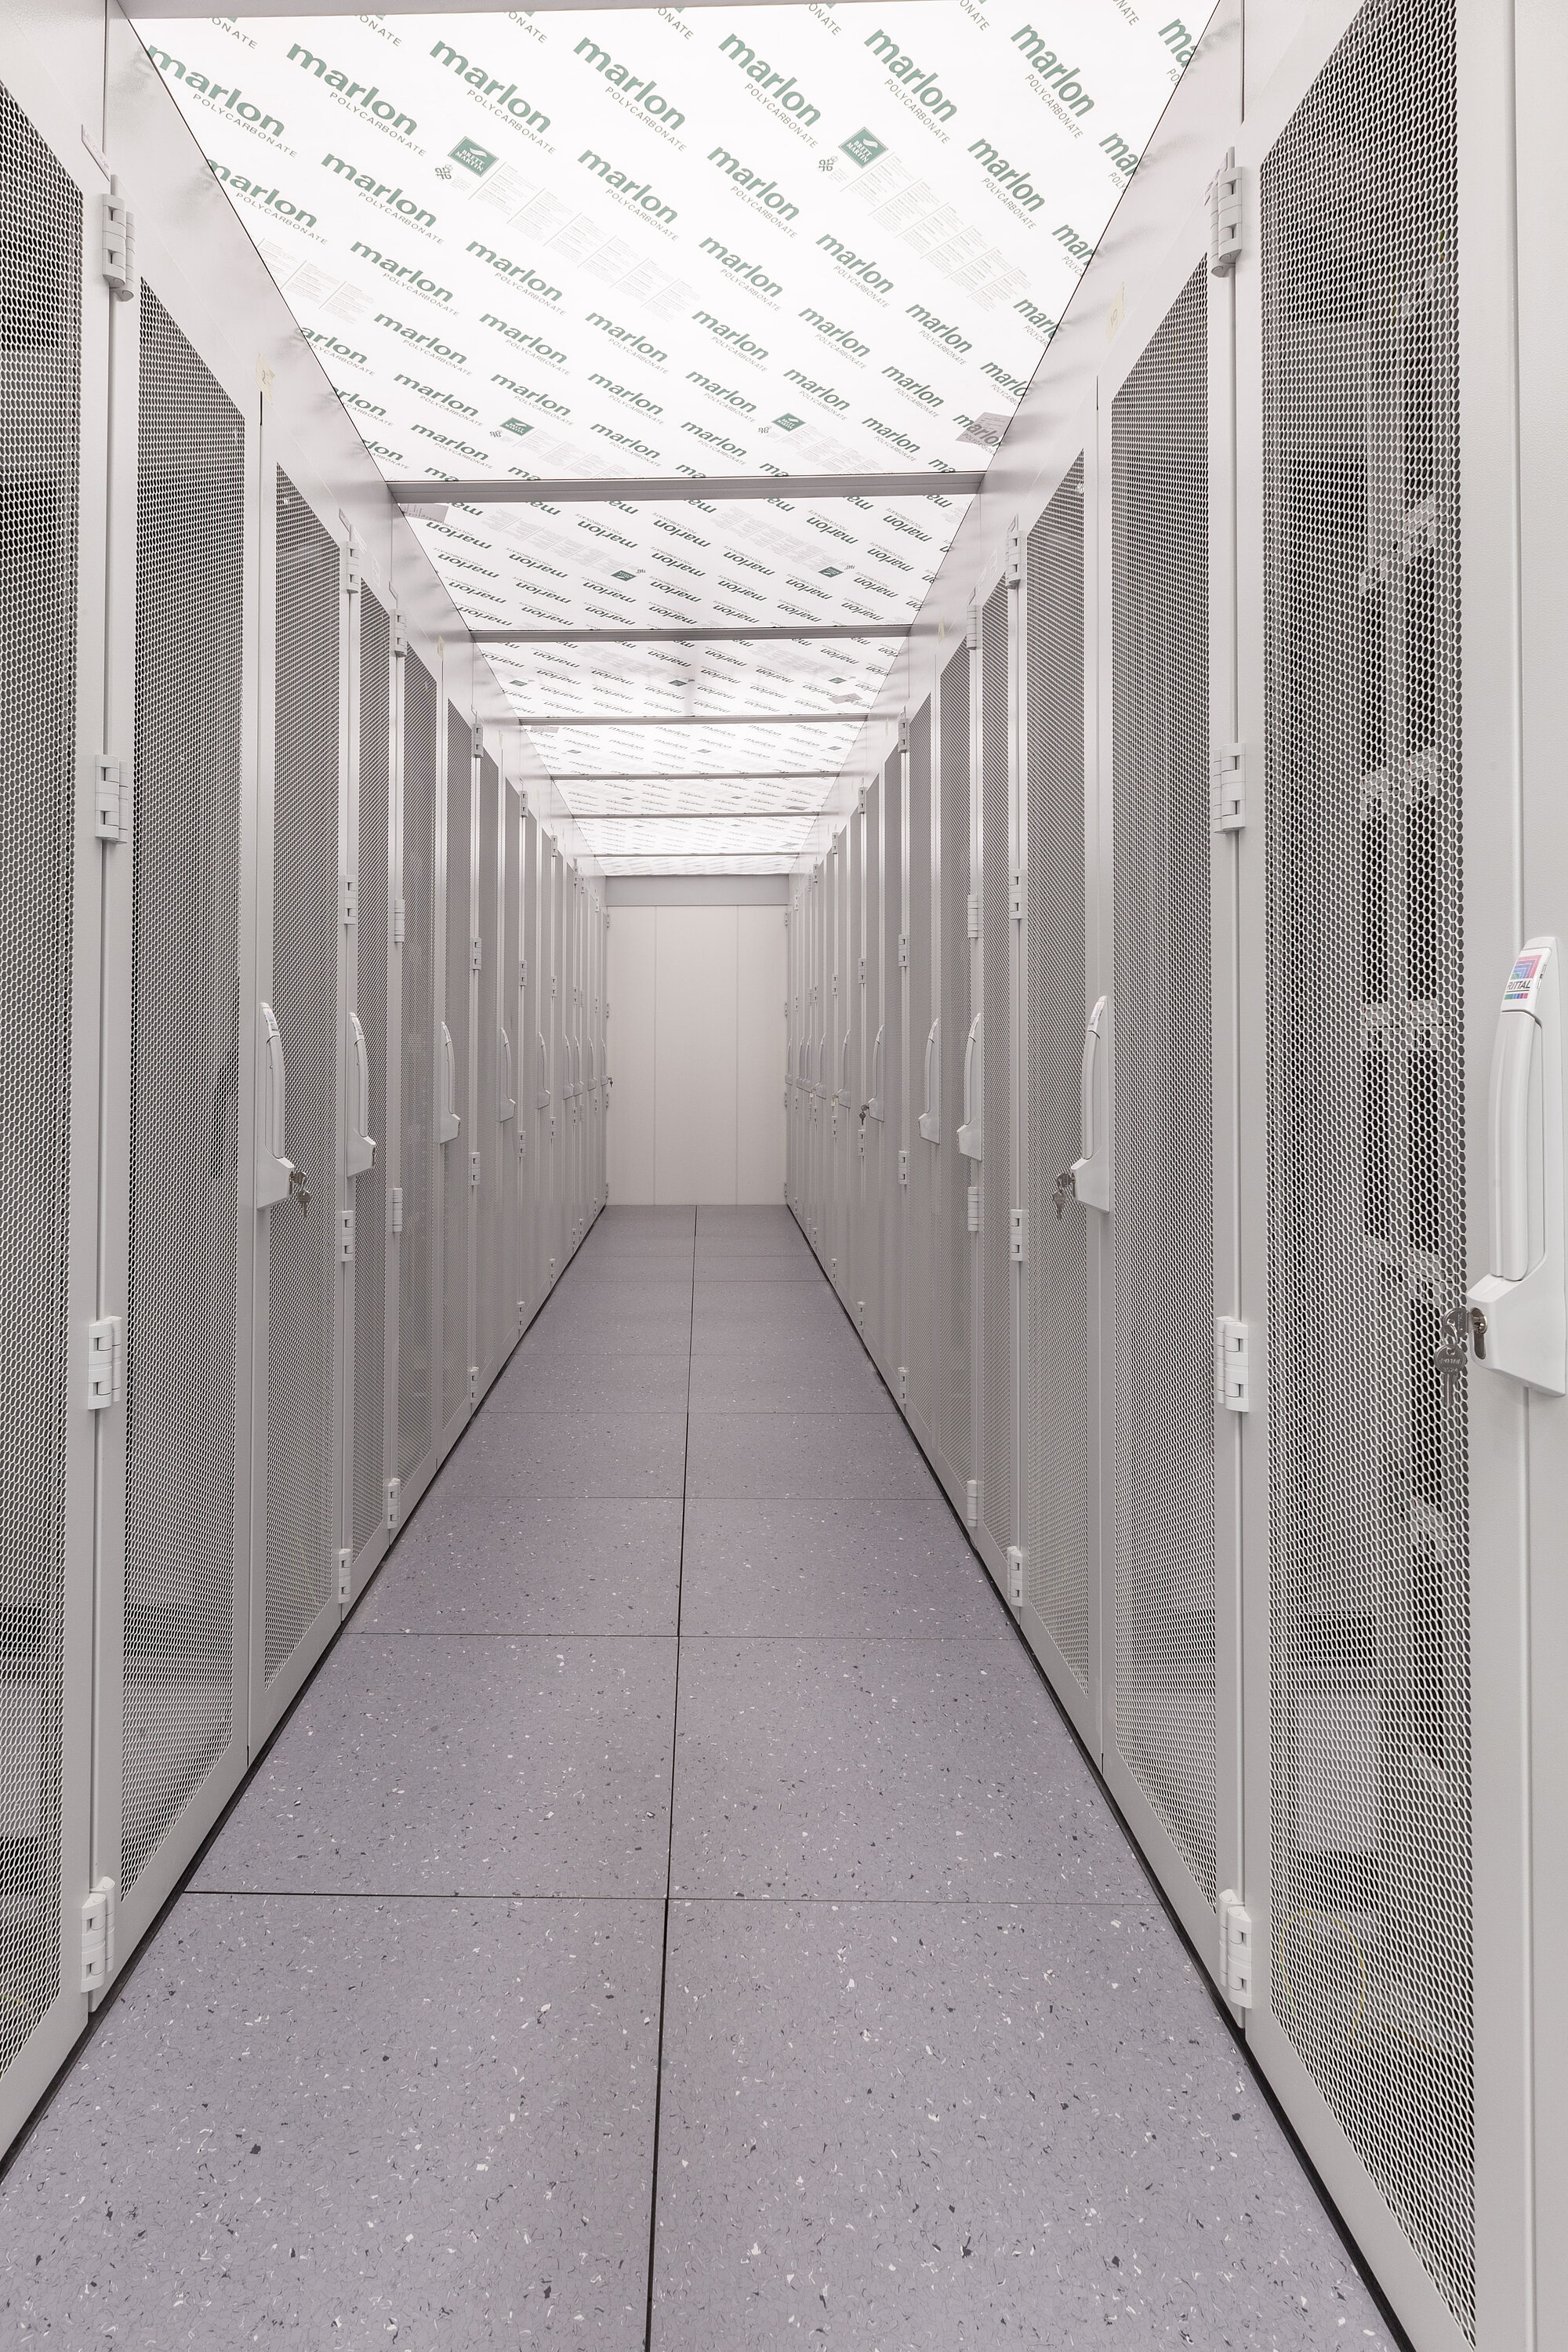 Server aisle, left and right server cabinets in white